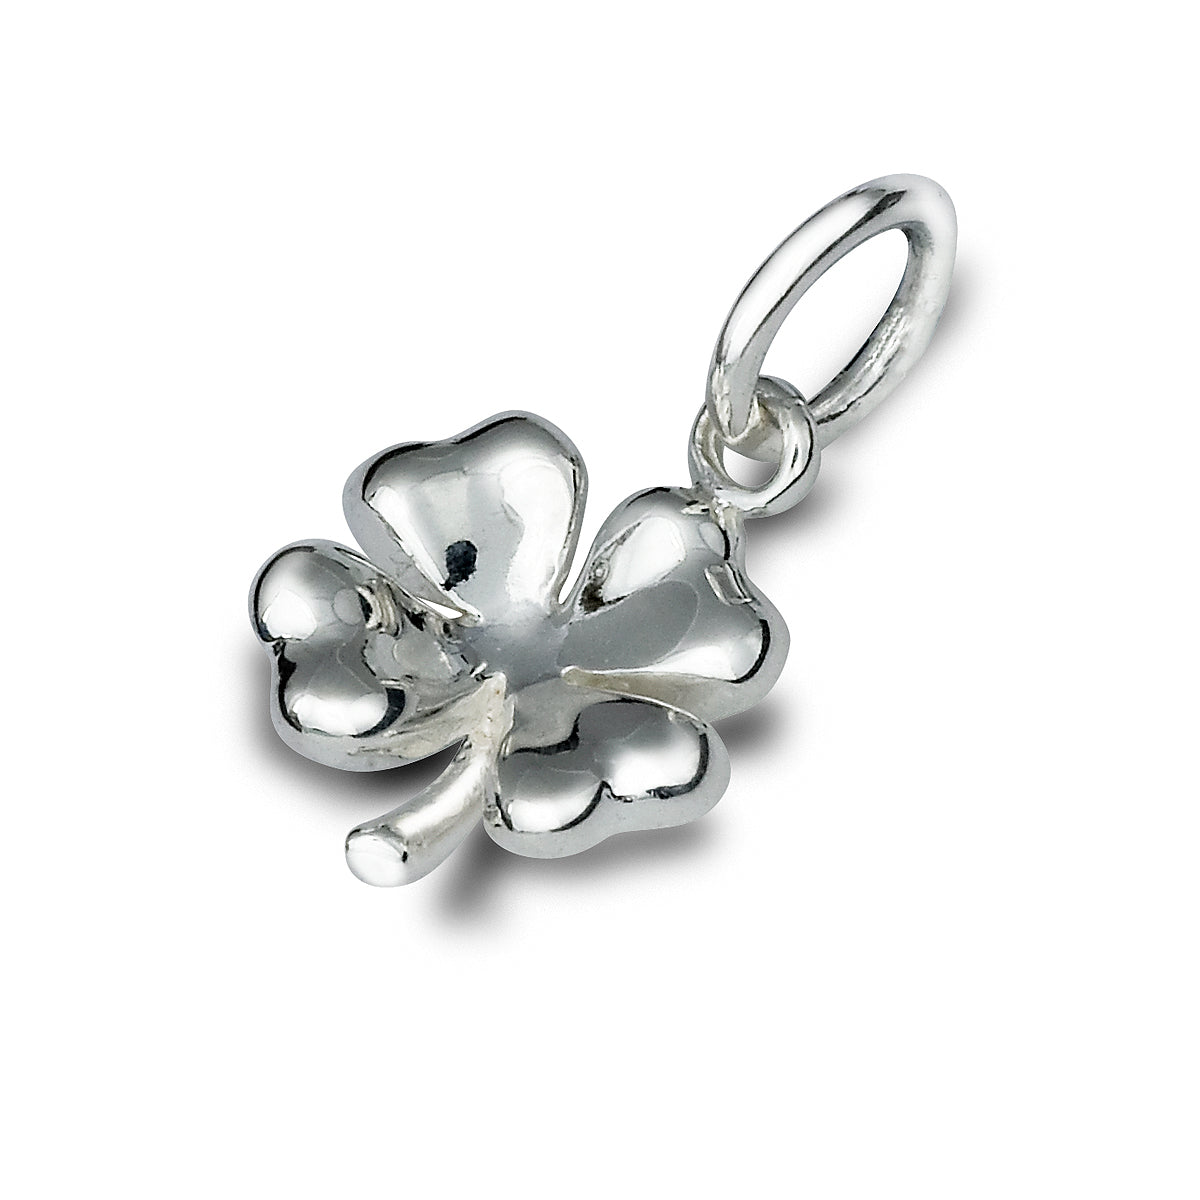 Carry good luck every day with this exquisite silver four leaf clover charm. FREE UK delivery.